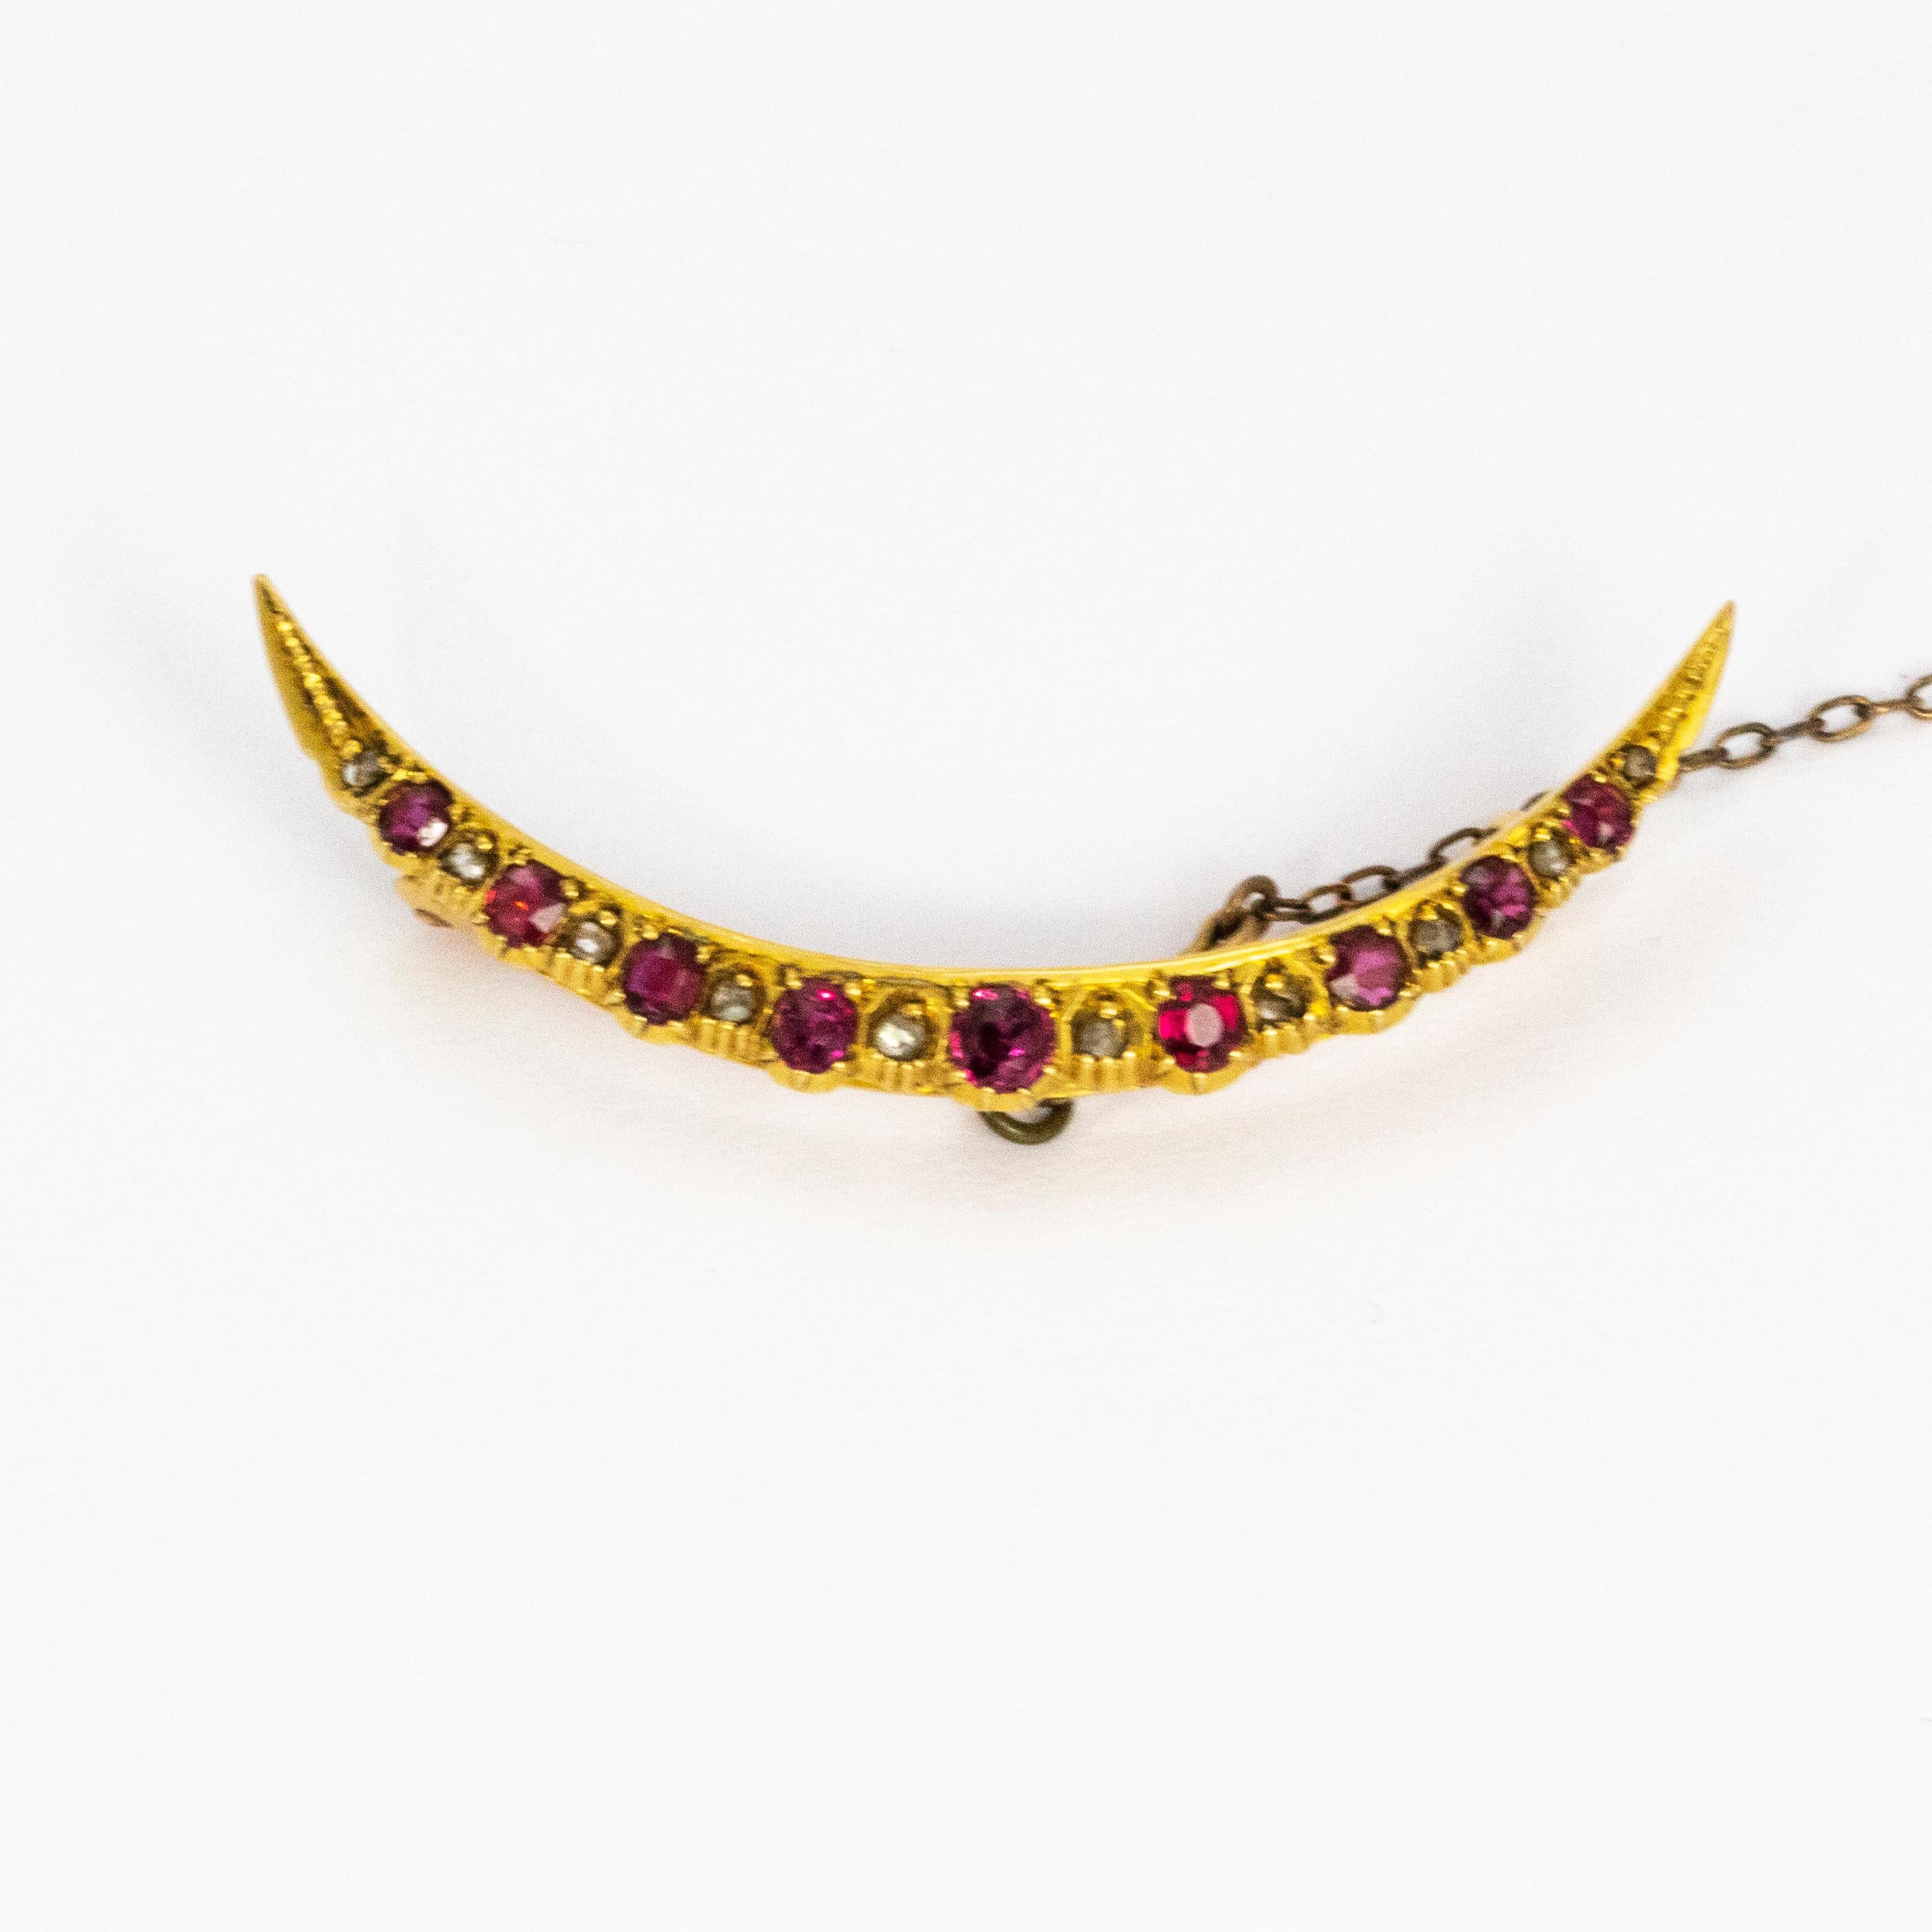 Gorgeous curved half moon 15ct gold brooch holding nine sparkling rubies and ten delicate diamonds.